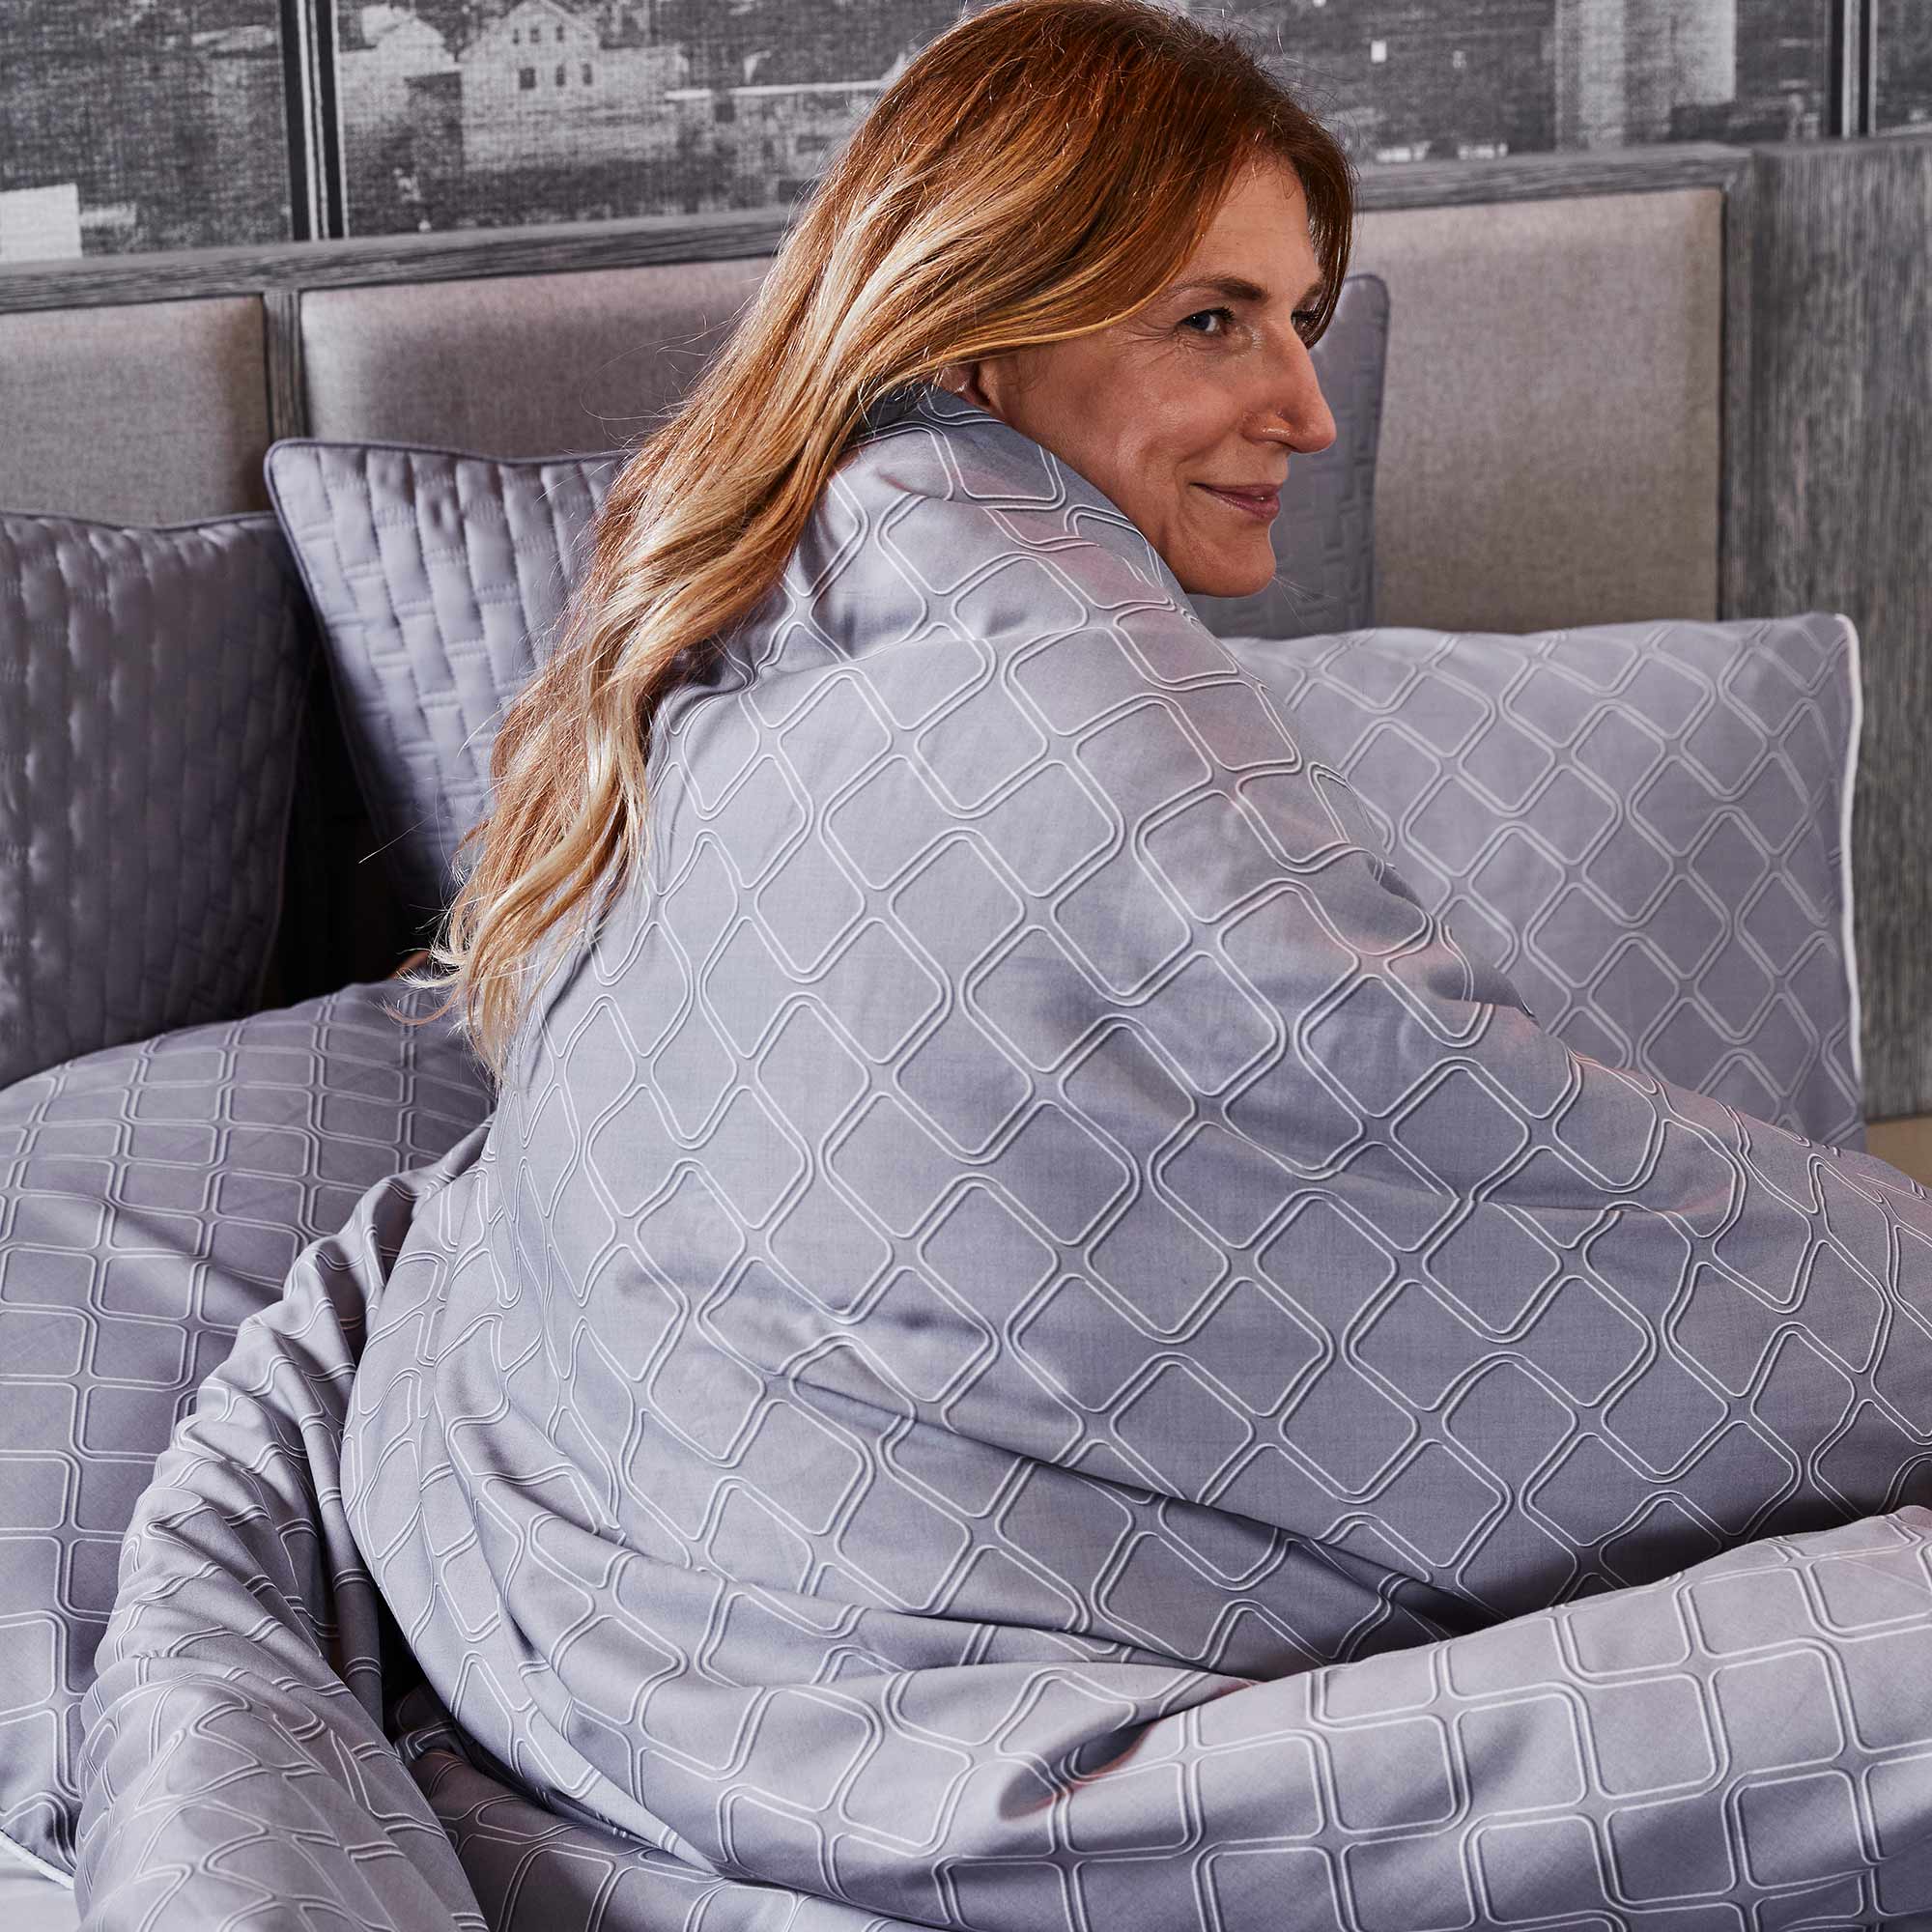 woman wrapped in geo pattern bamboo duvet cover in bed